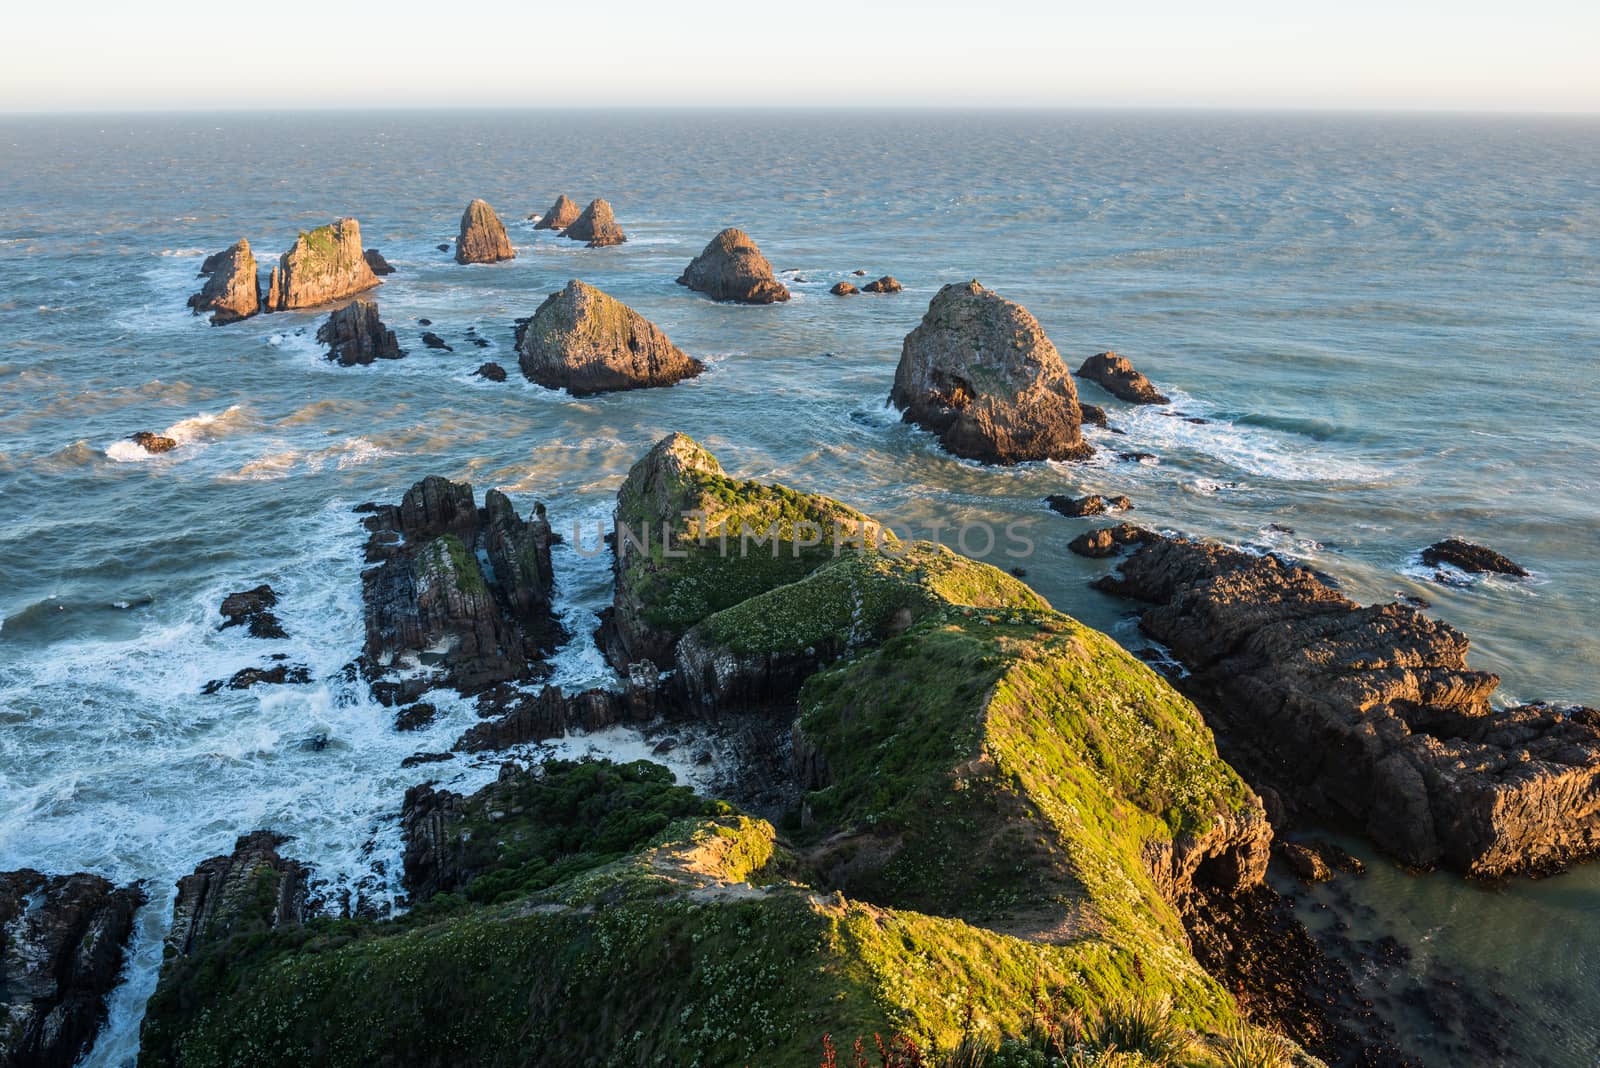 The setting sun illuminates boulders and waves of Nugget Point, the end of the New Zealand